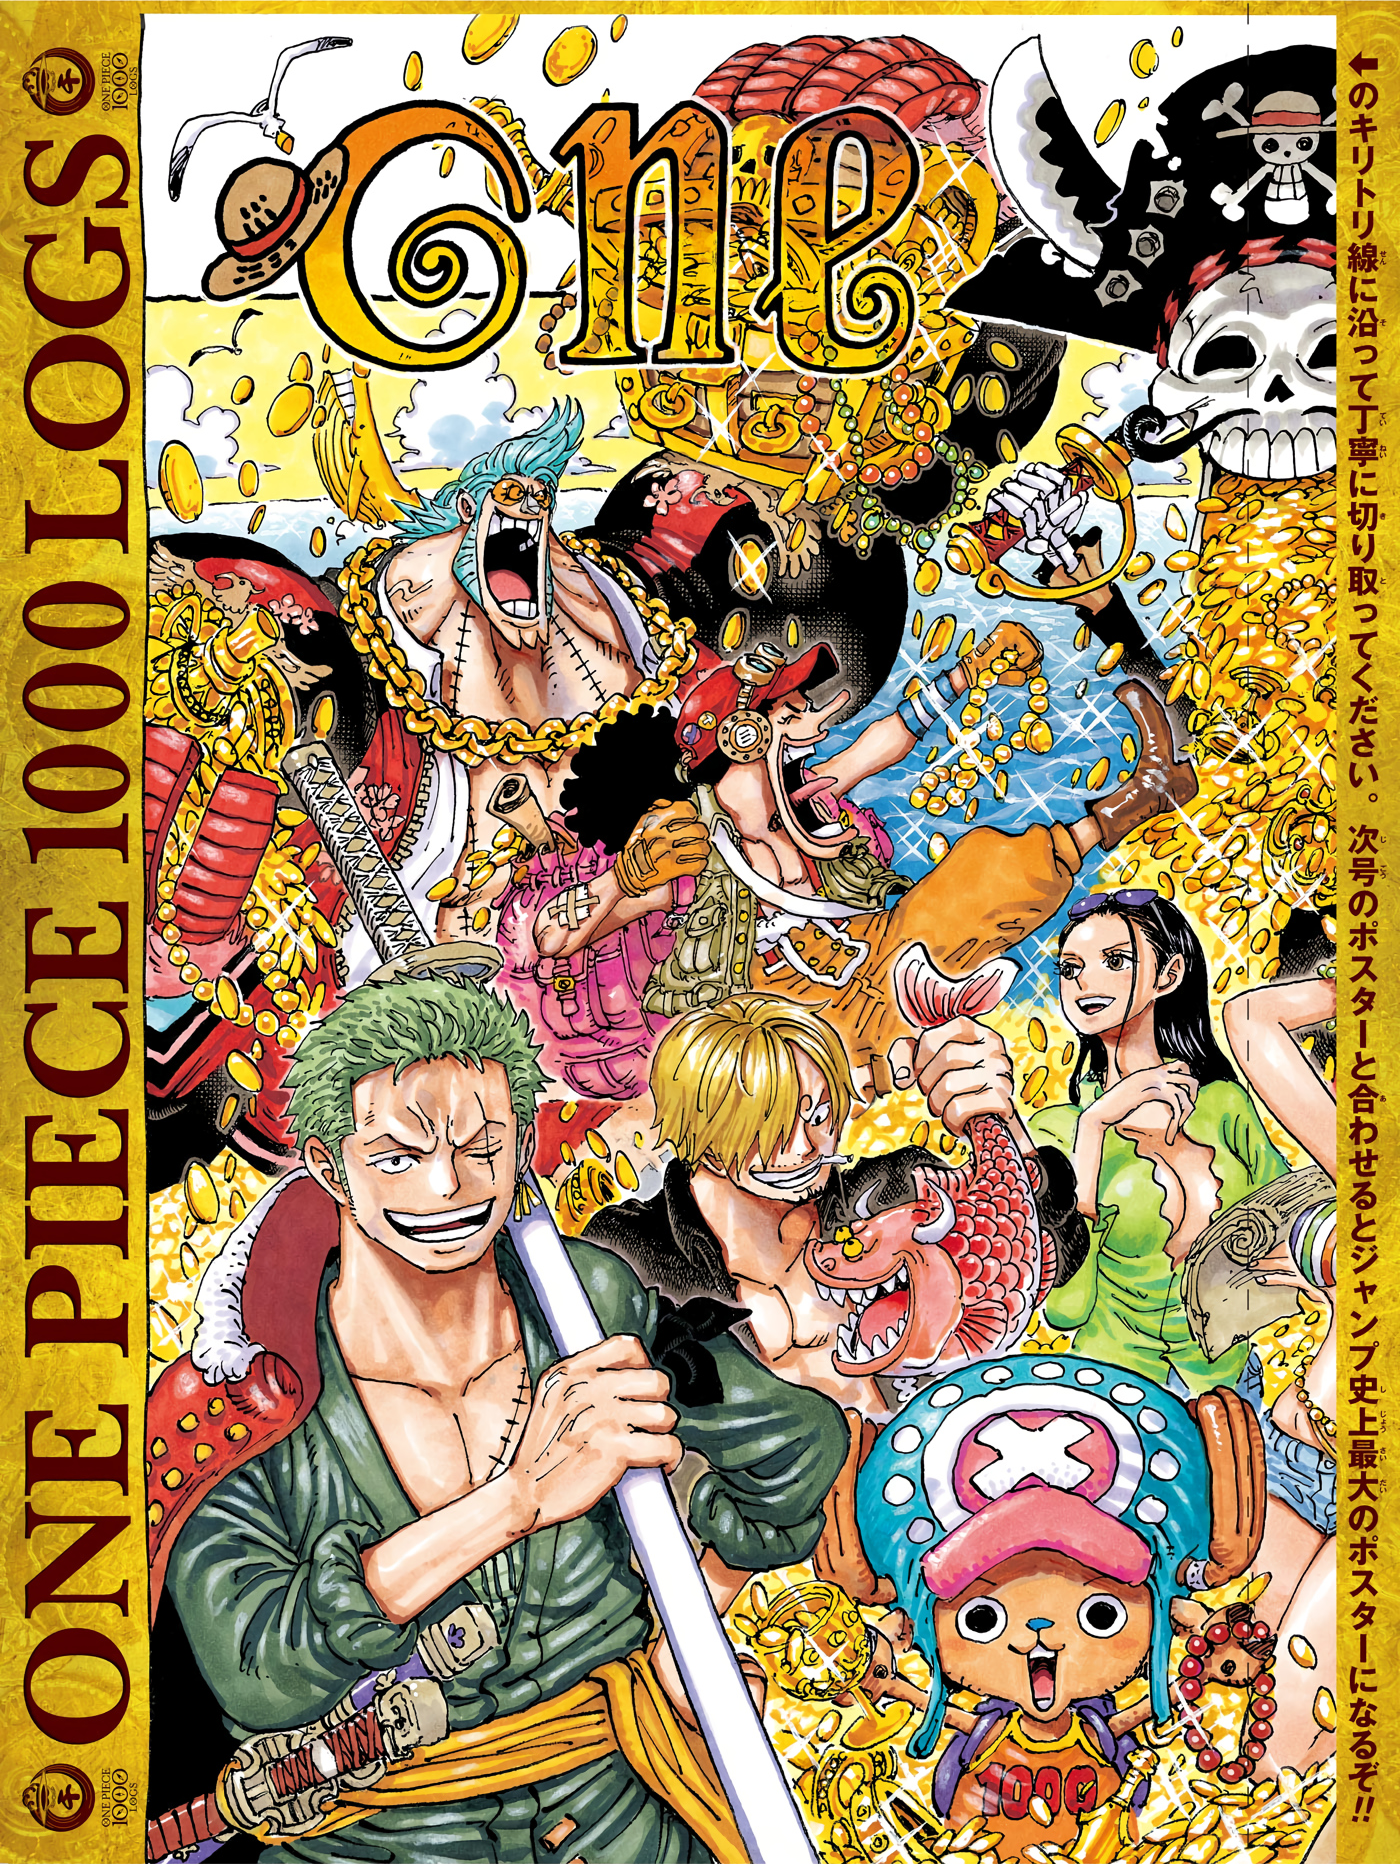 One Piece Voice Actors On The Historic 1000th Episode